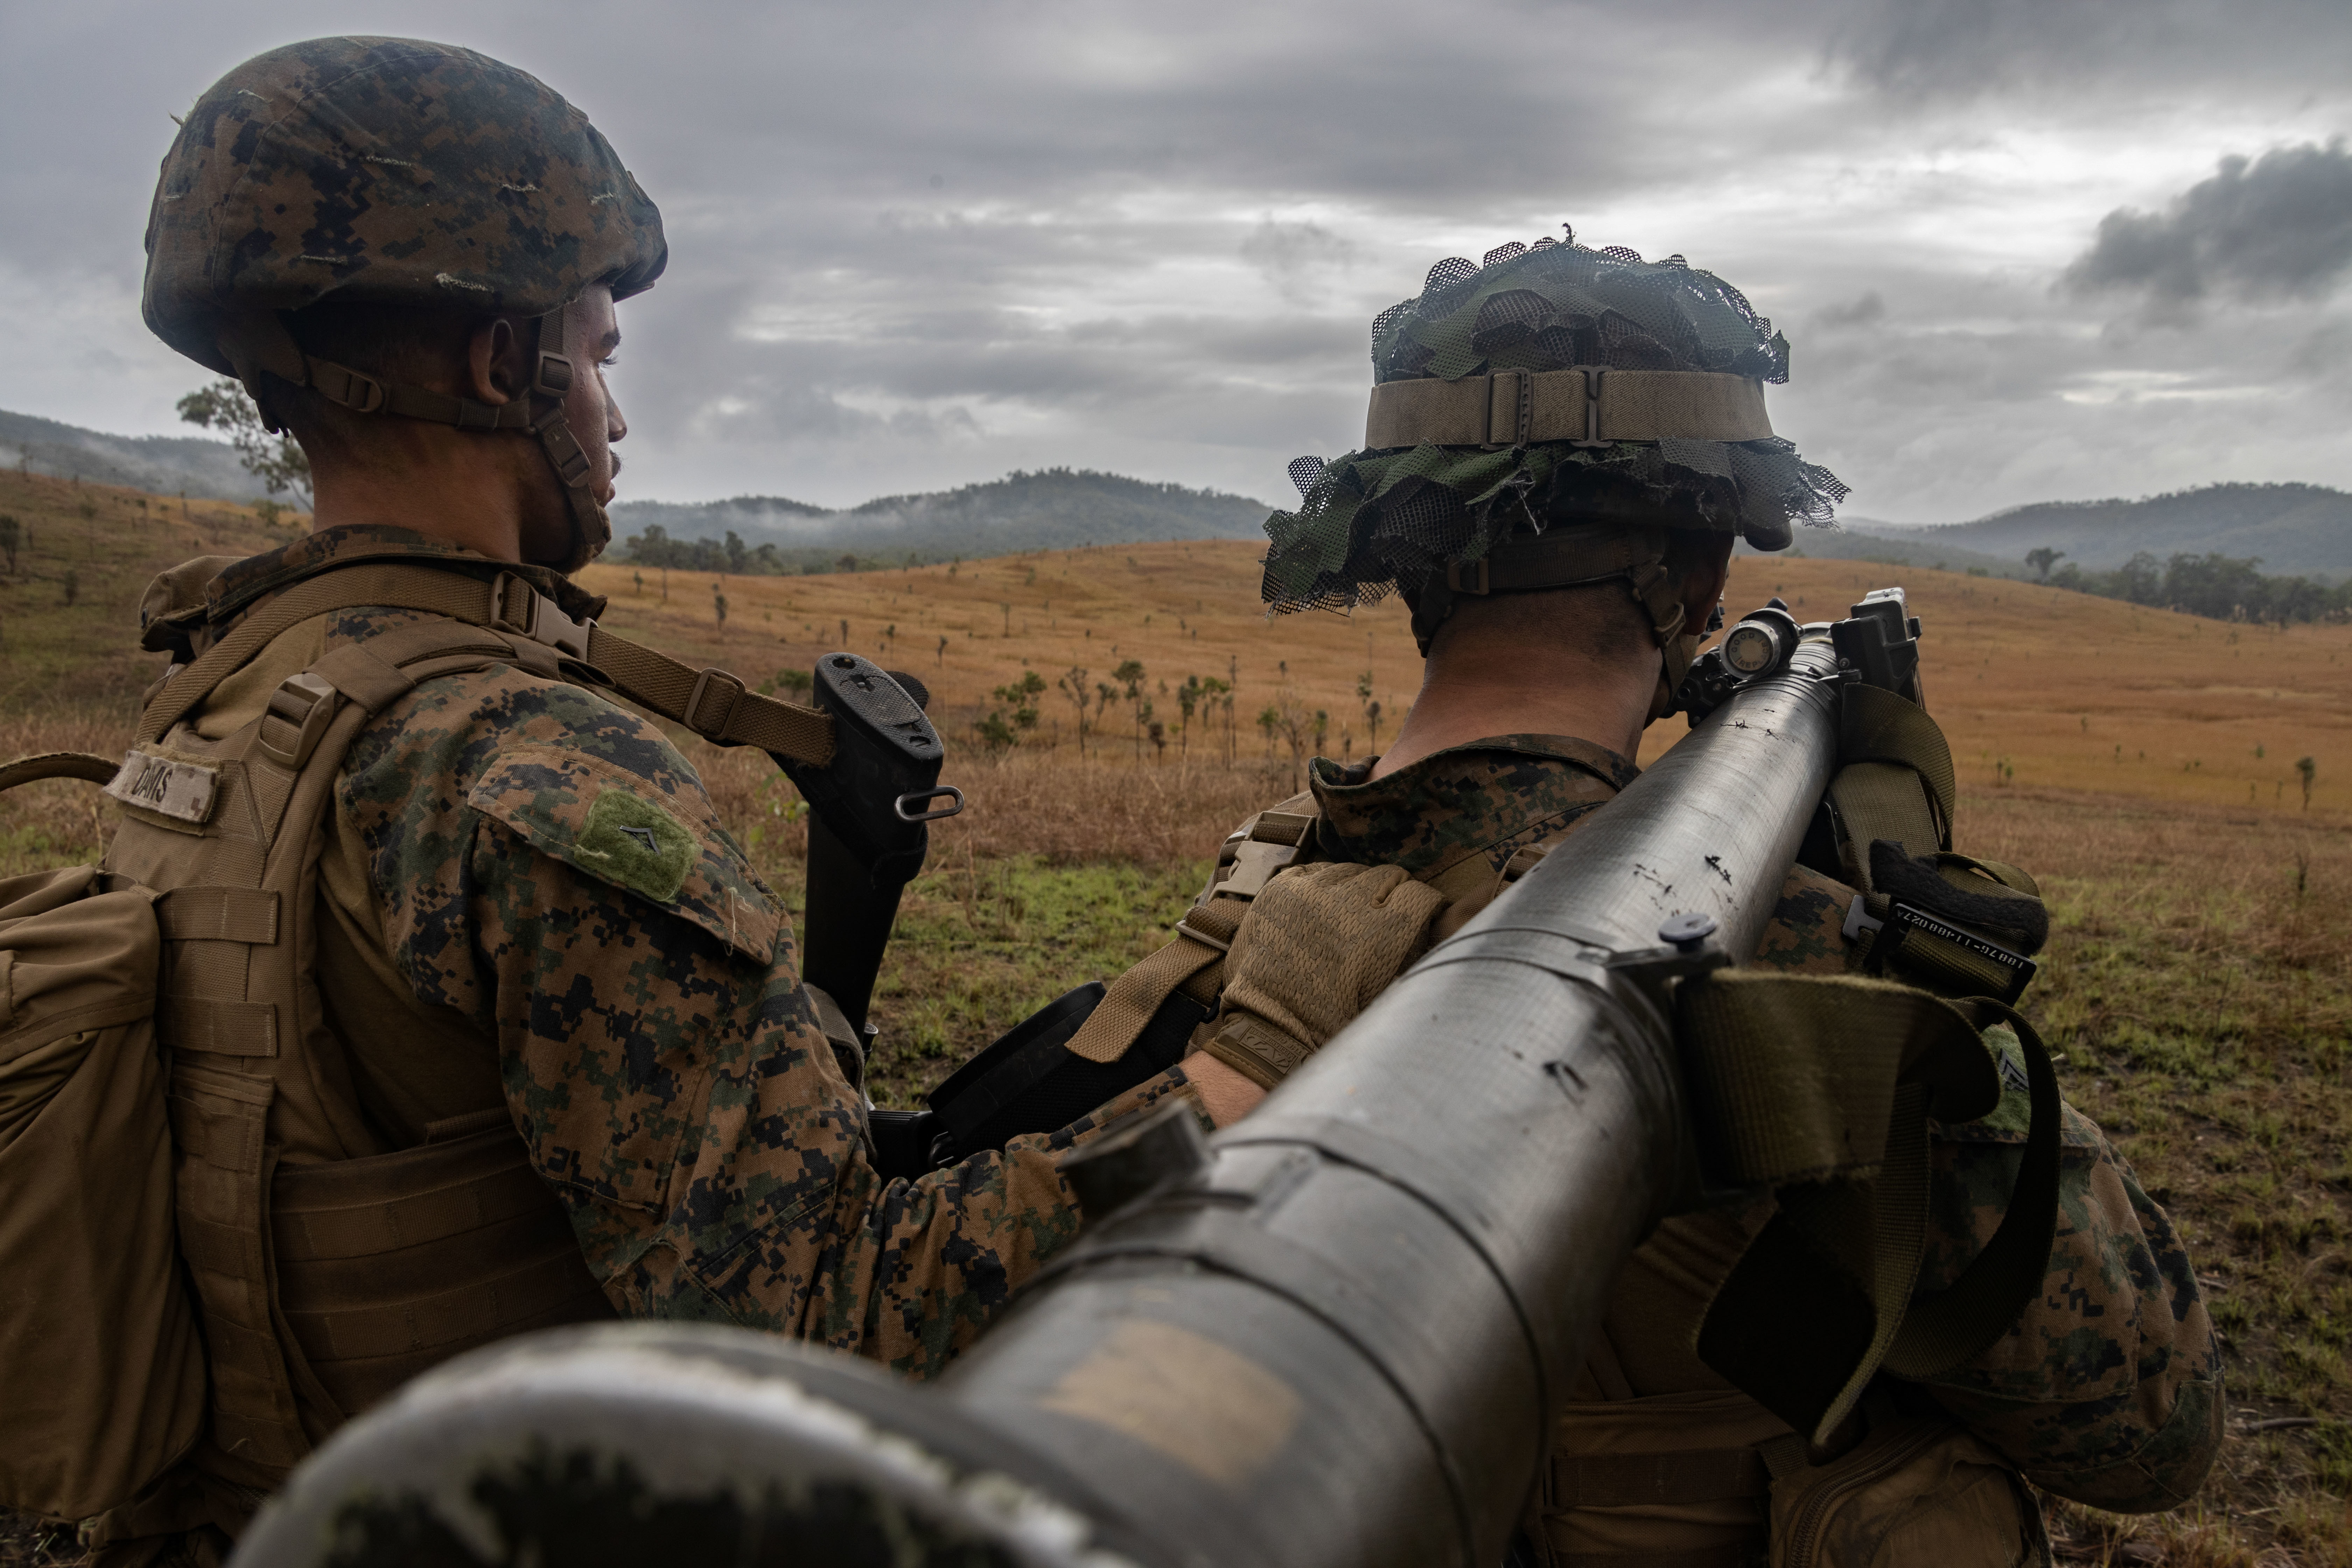 31st Marine Expeditionary Unit Trains for Humanitarian Assistance